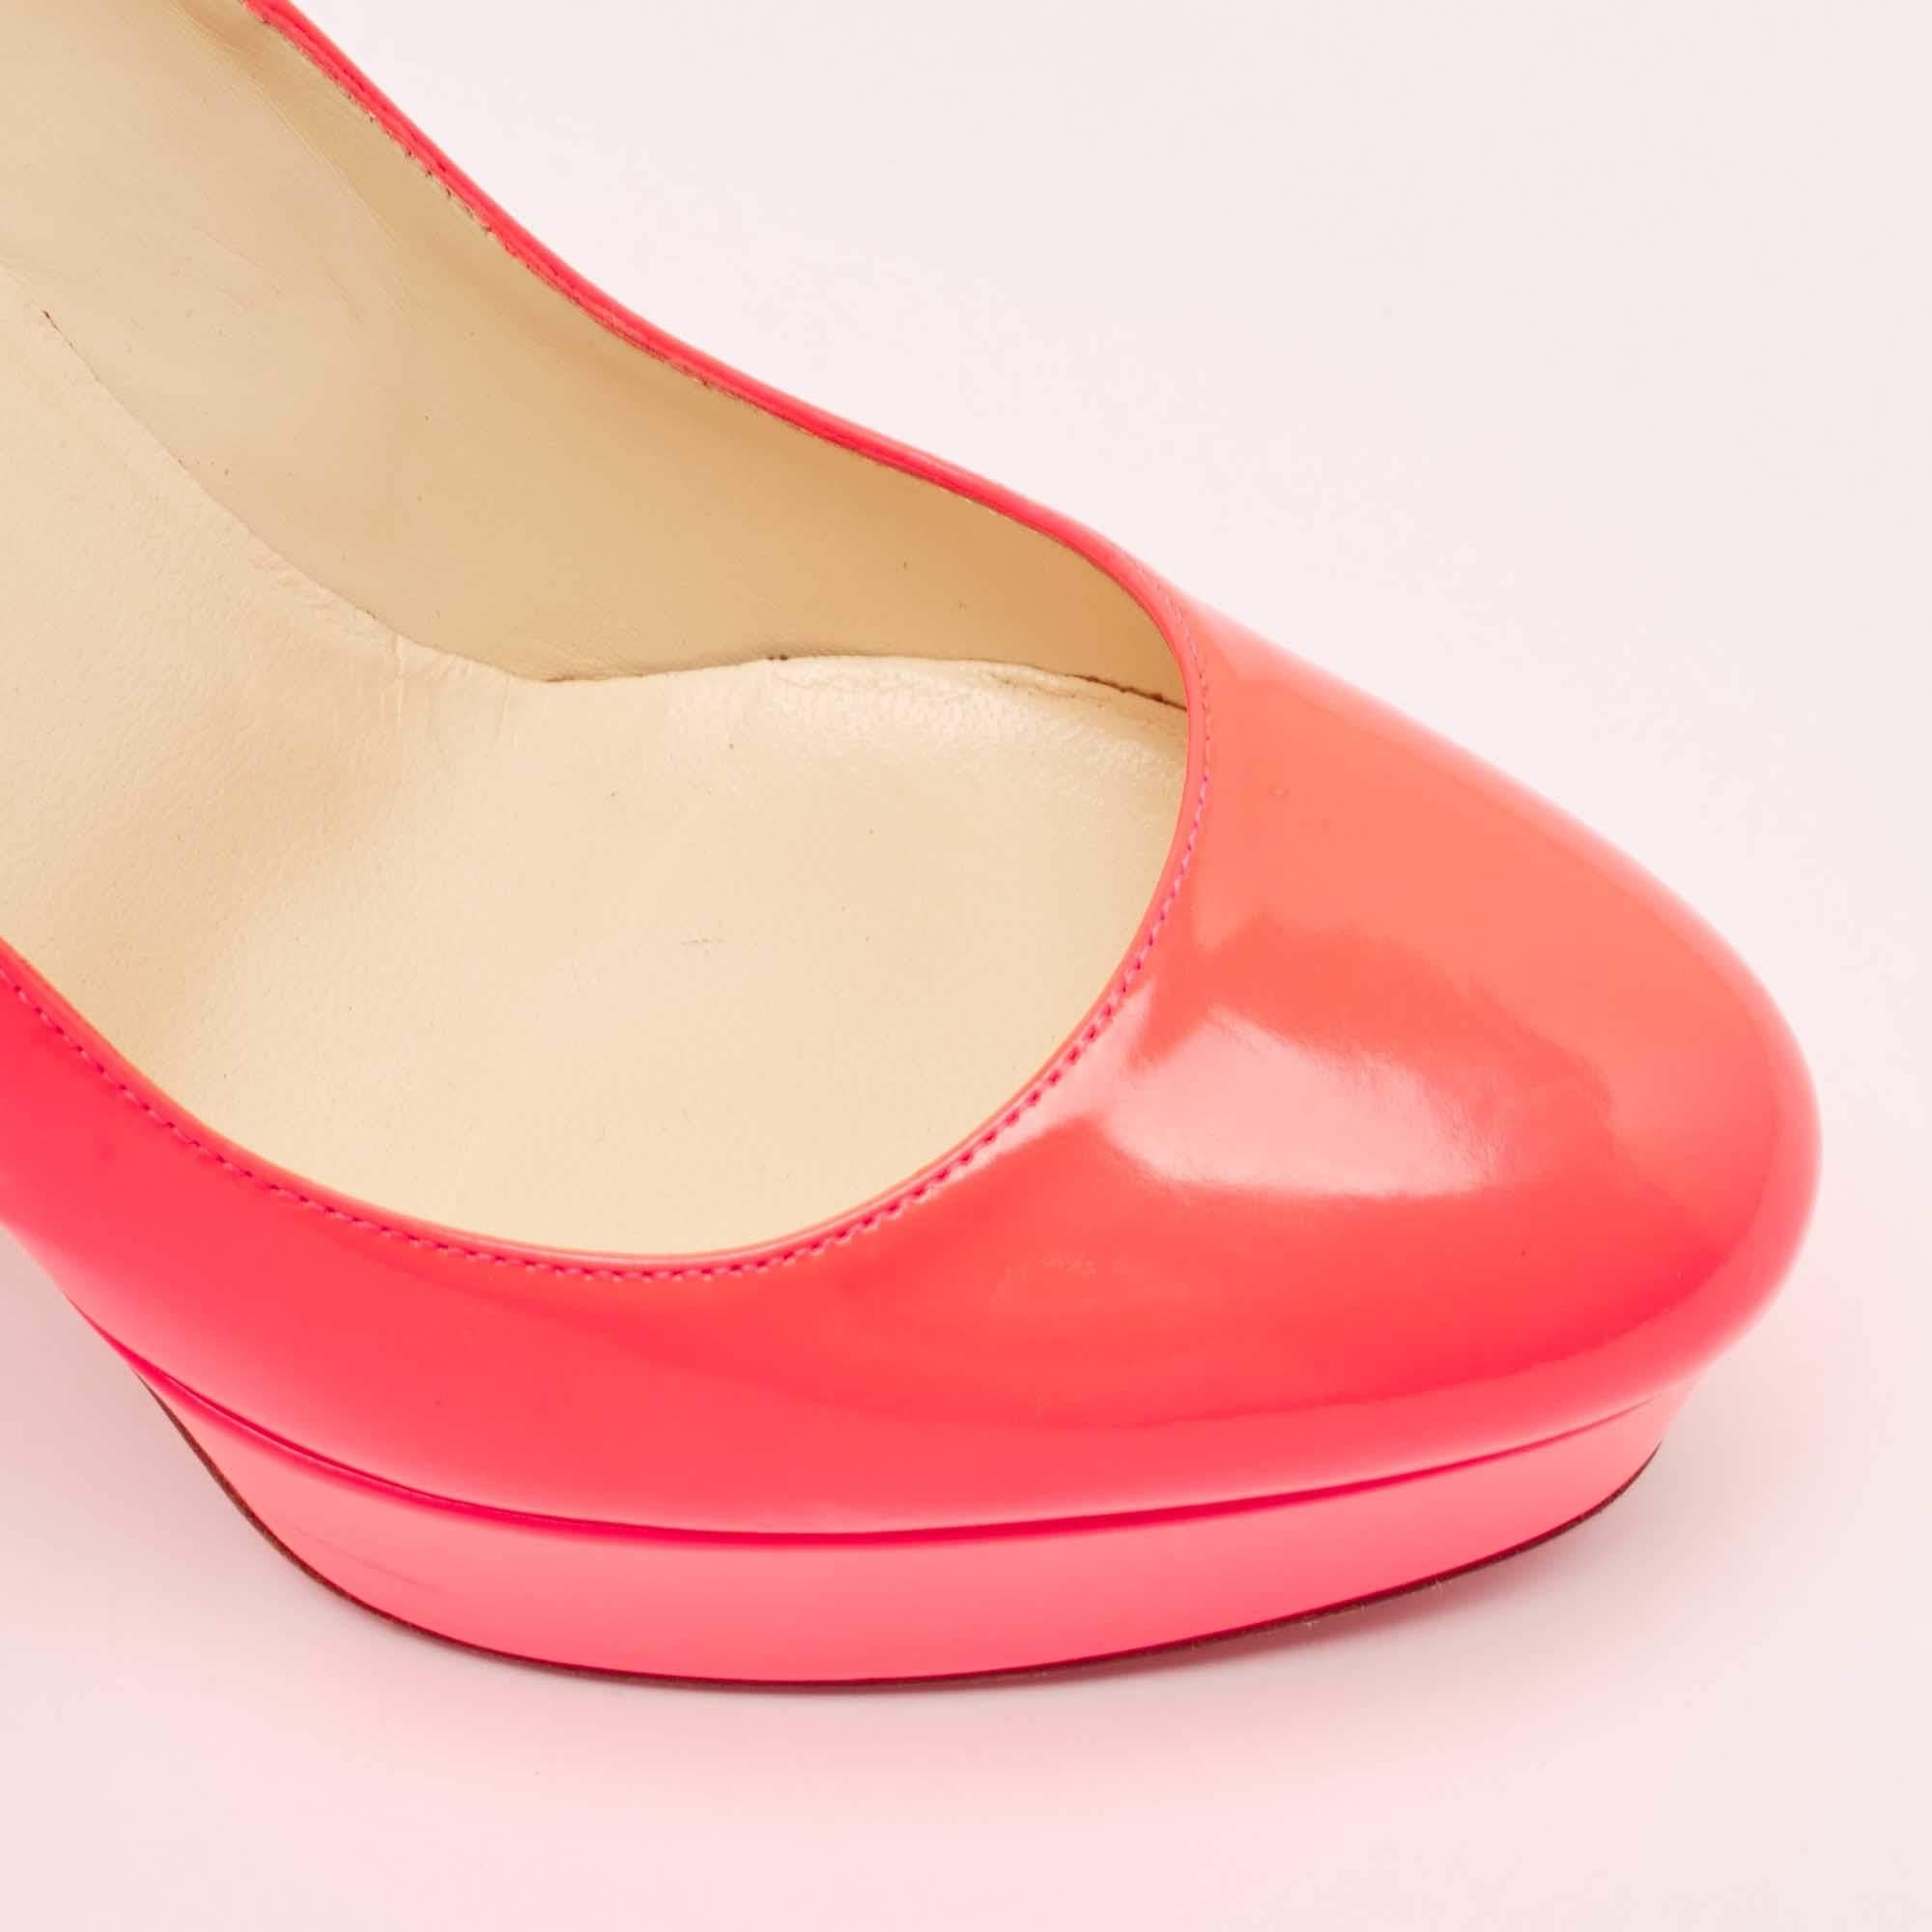 Christian Louboutin Neon Pink Leather Bianca Pumps Size 39.5 For Sale 4